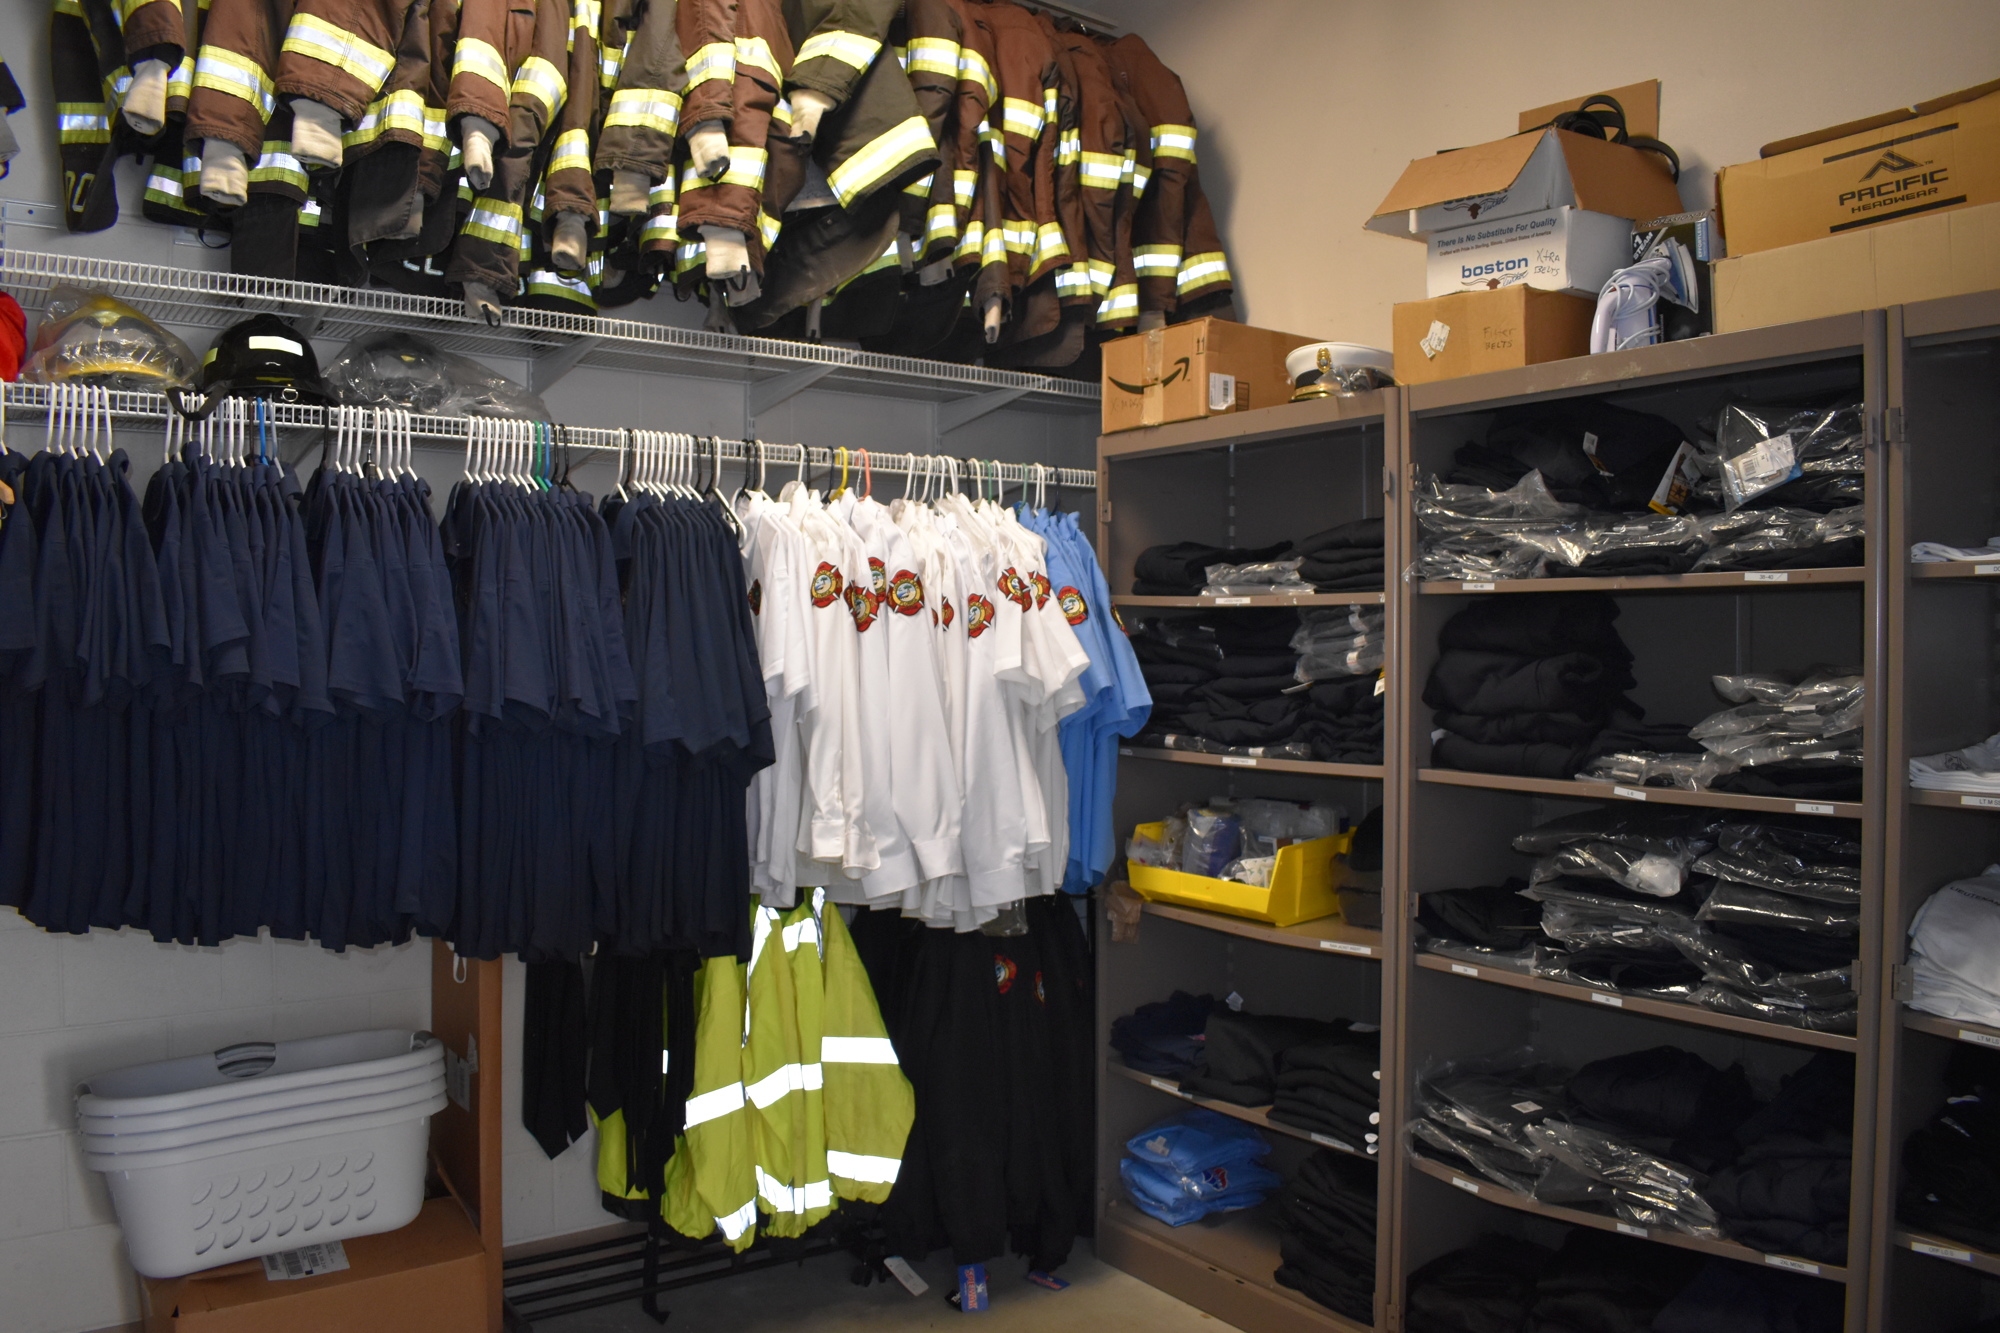 Longboat Key Fire Rescue stores extra uniforms, jackets and gear in an air-conditioned room.